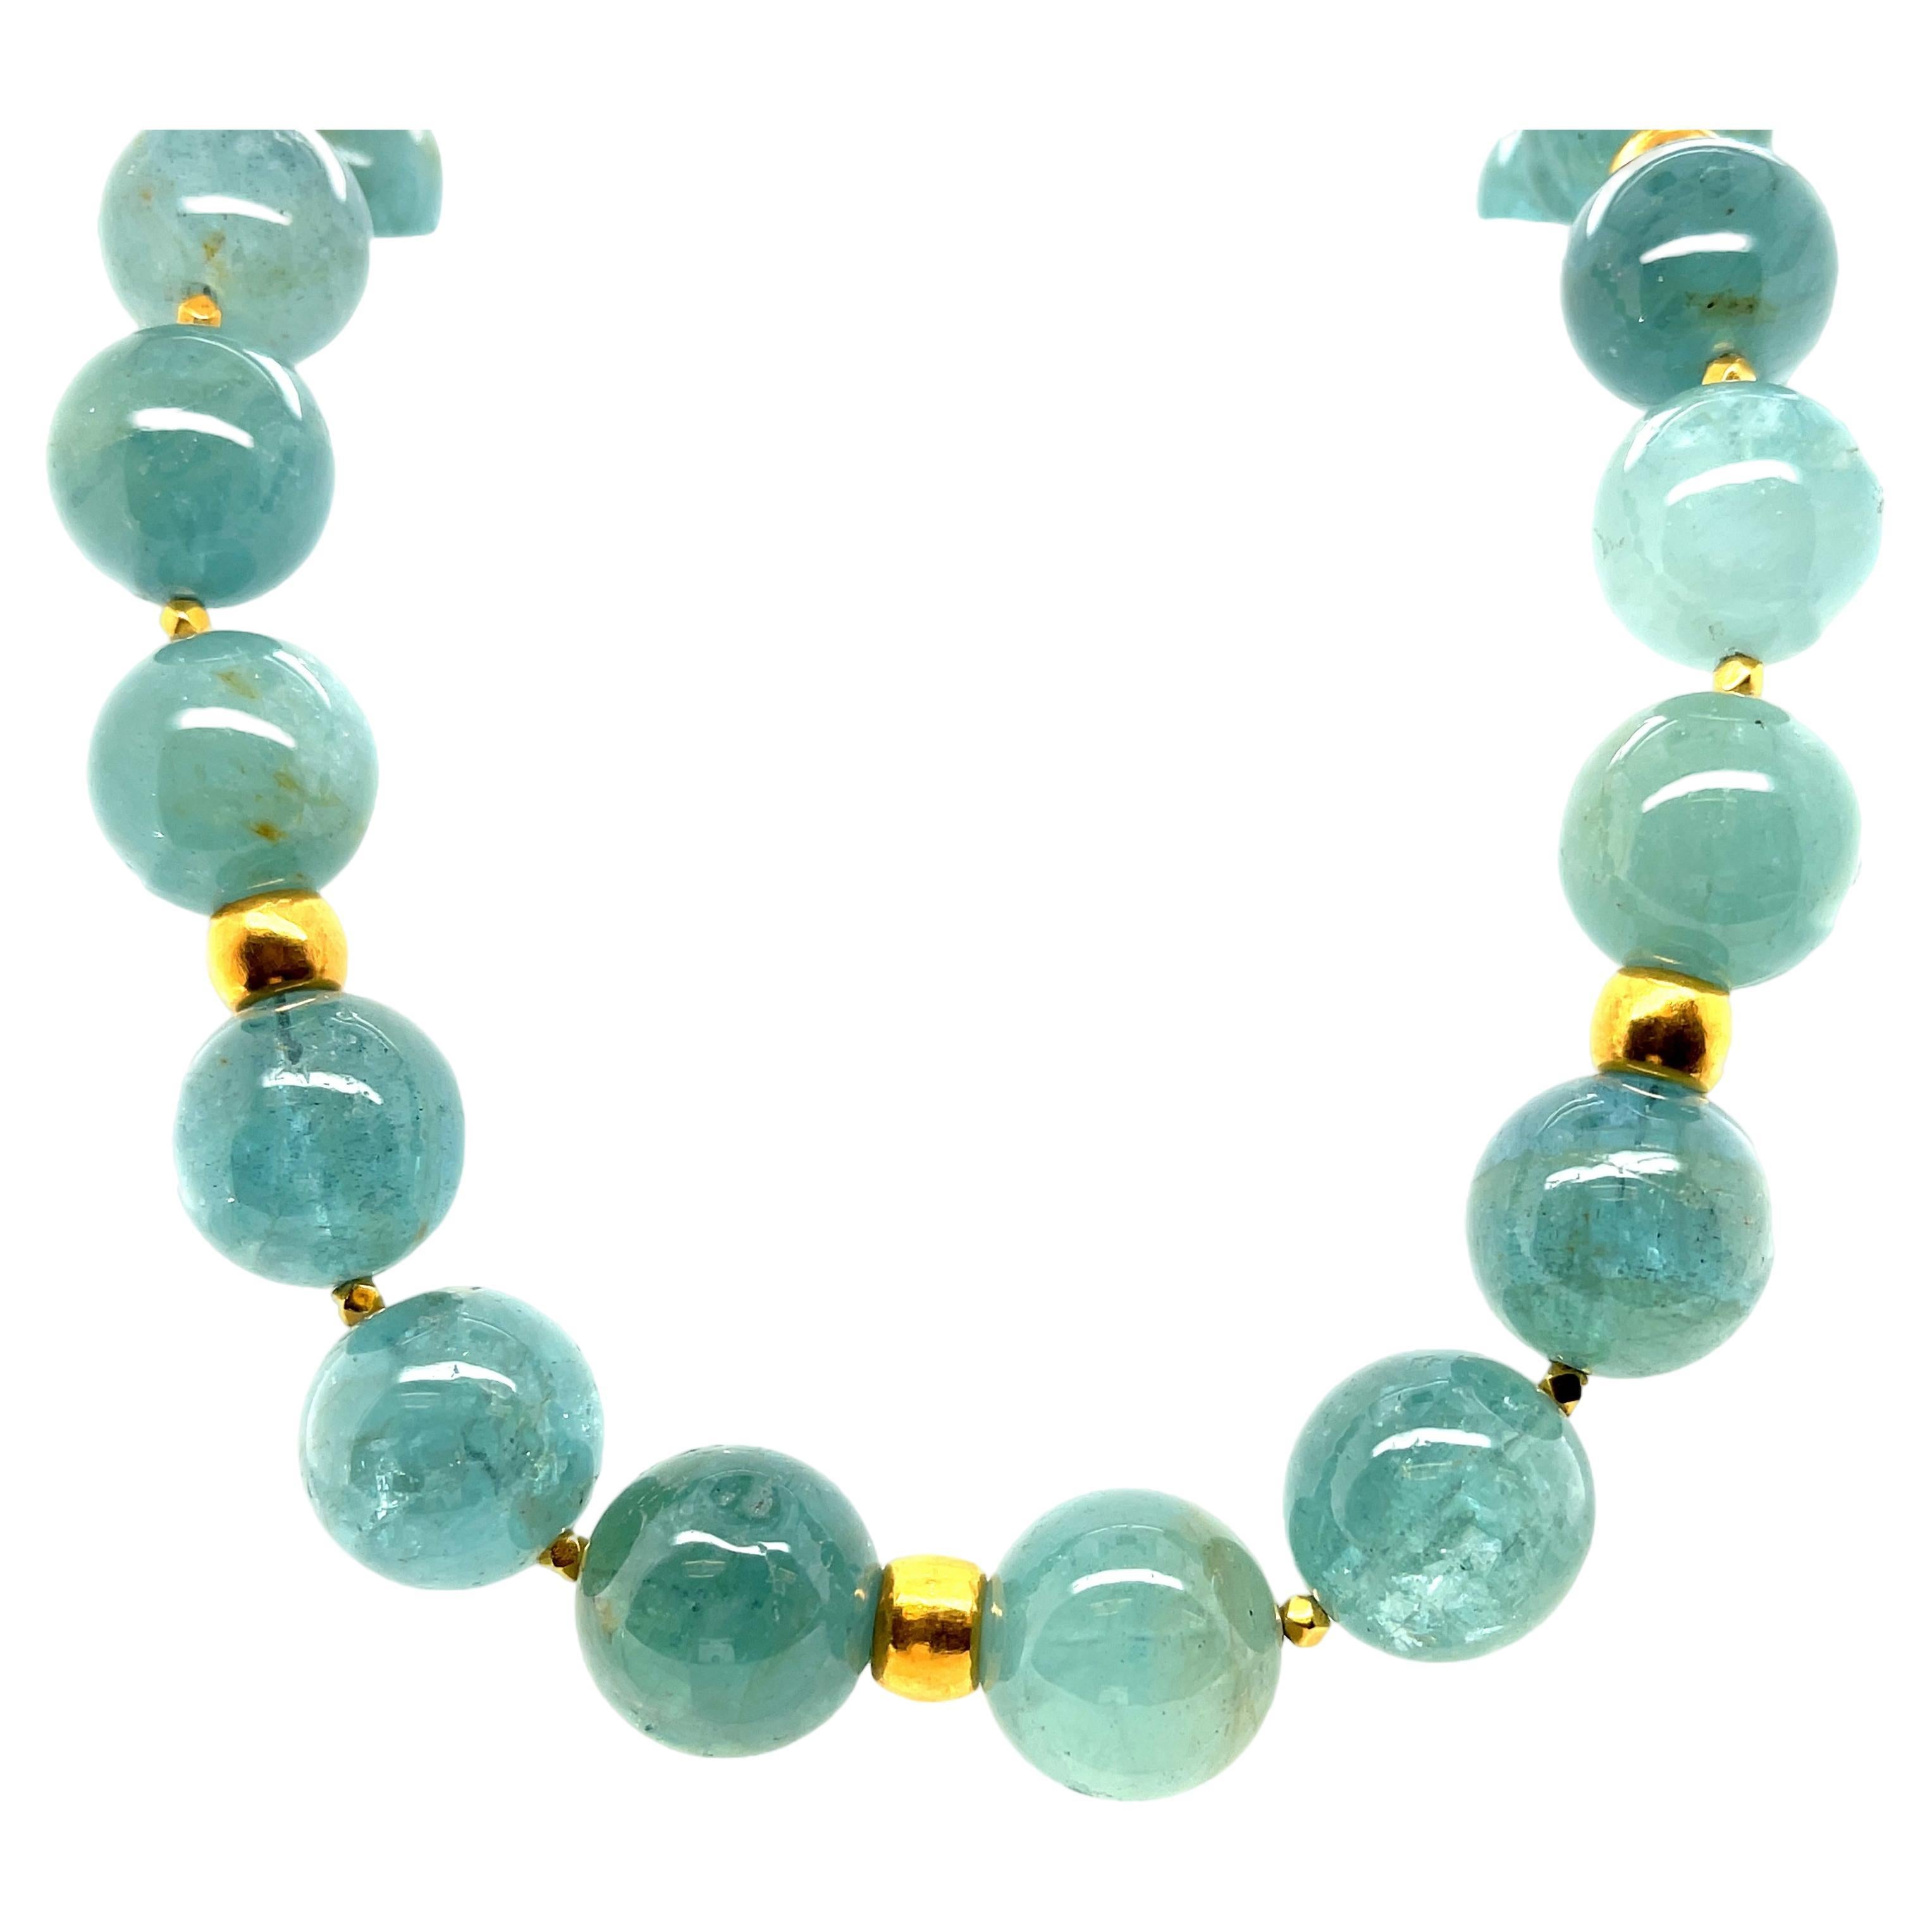 16mm Sea Foam Green Aquamarine Bead and 18k Yellow Gold Necklace, 20 Inches